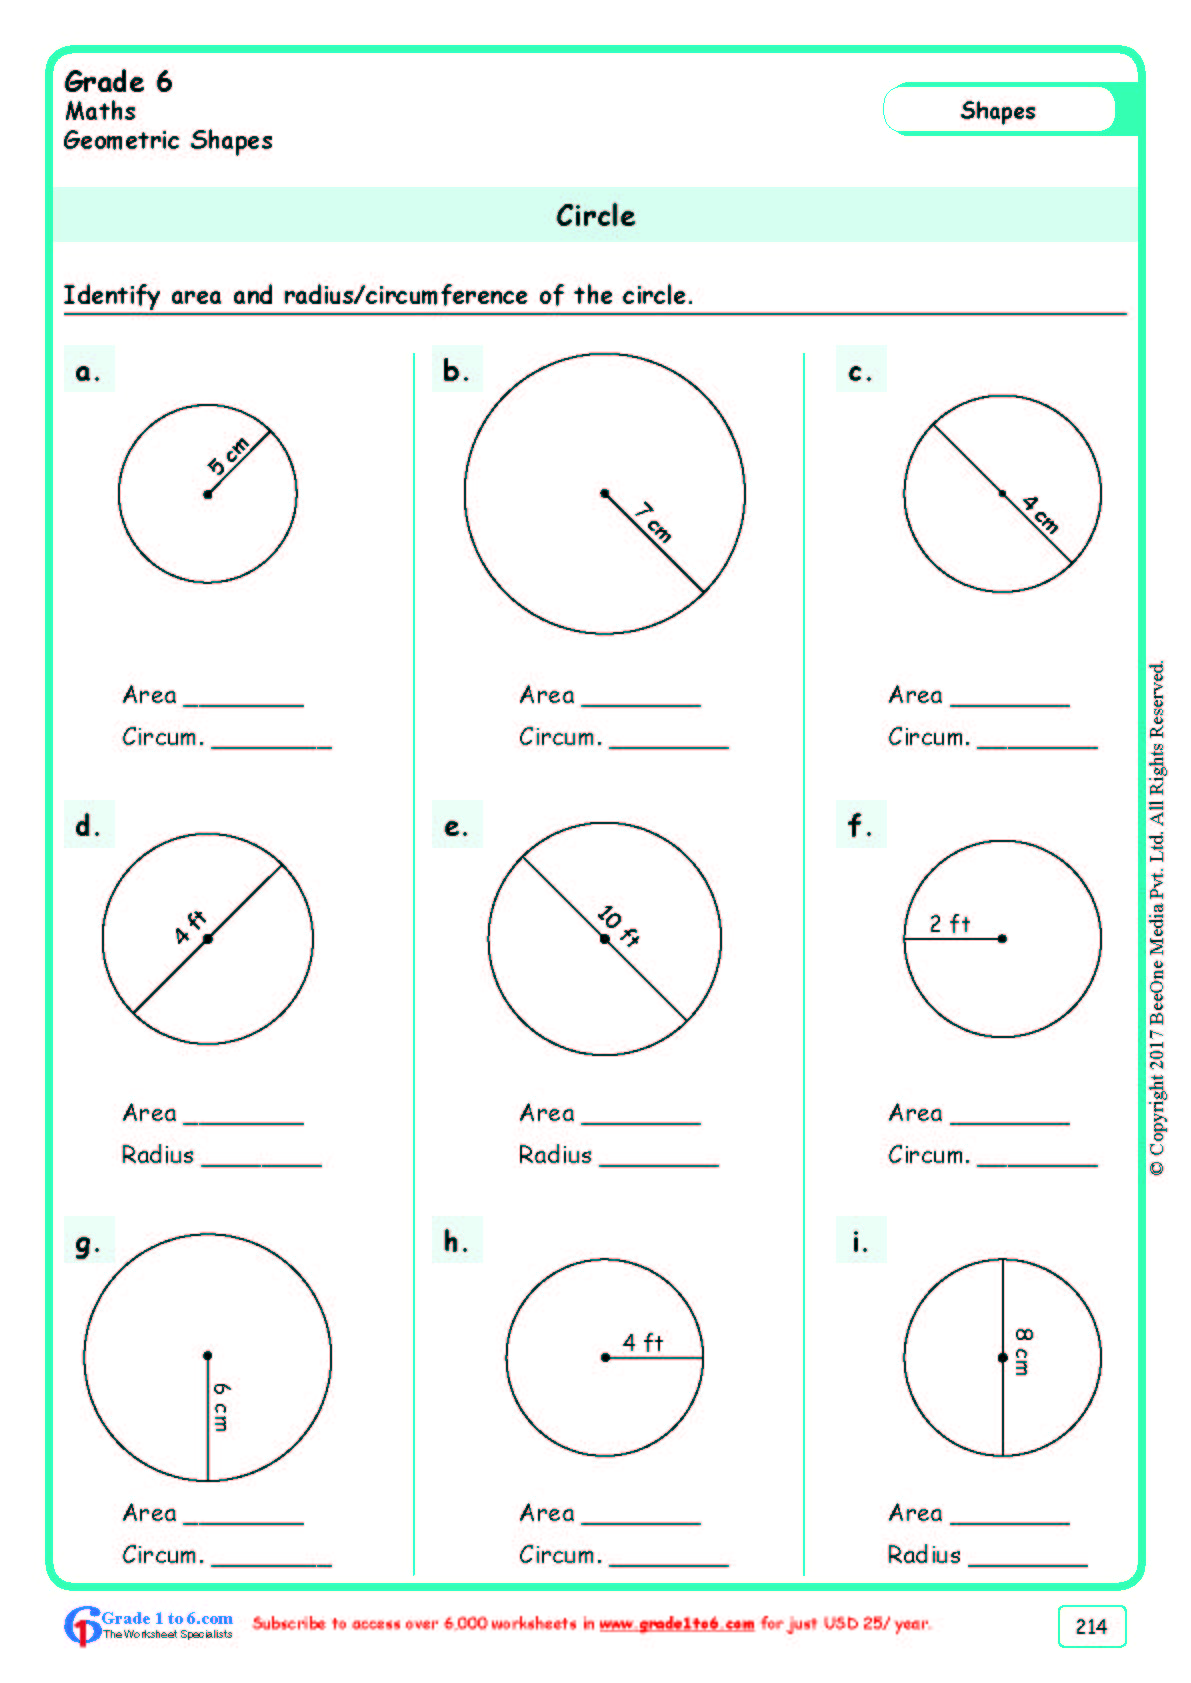 Free Math Worksheets for grade 6|class 6|IB |CBSE|ICSE|K12 and all